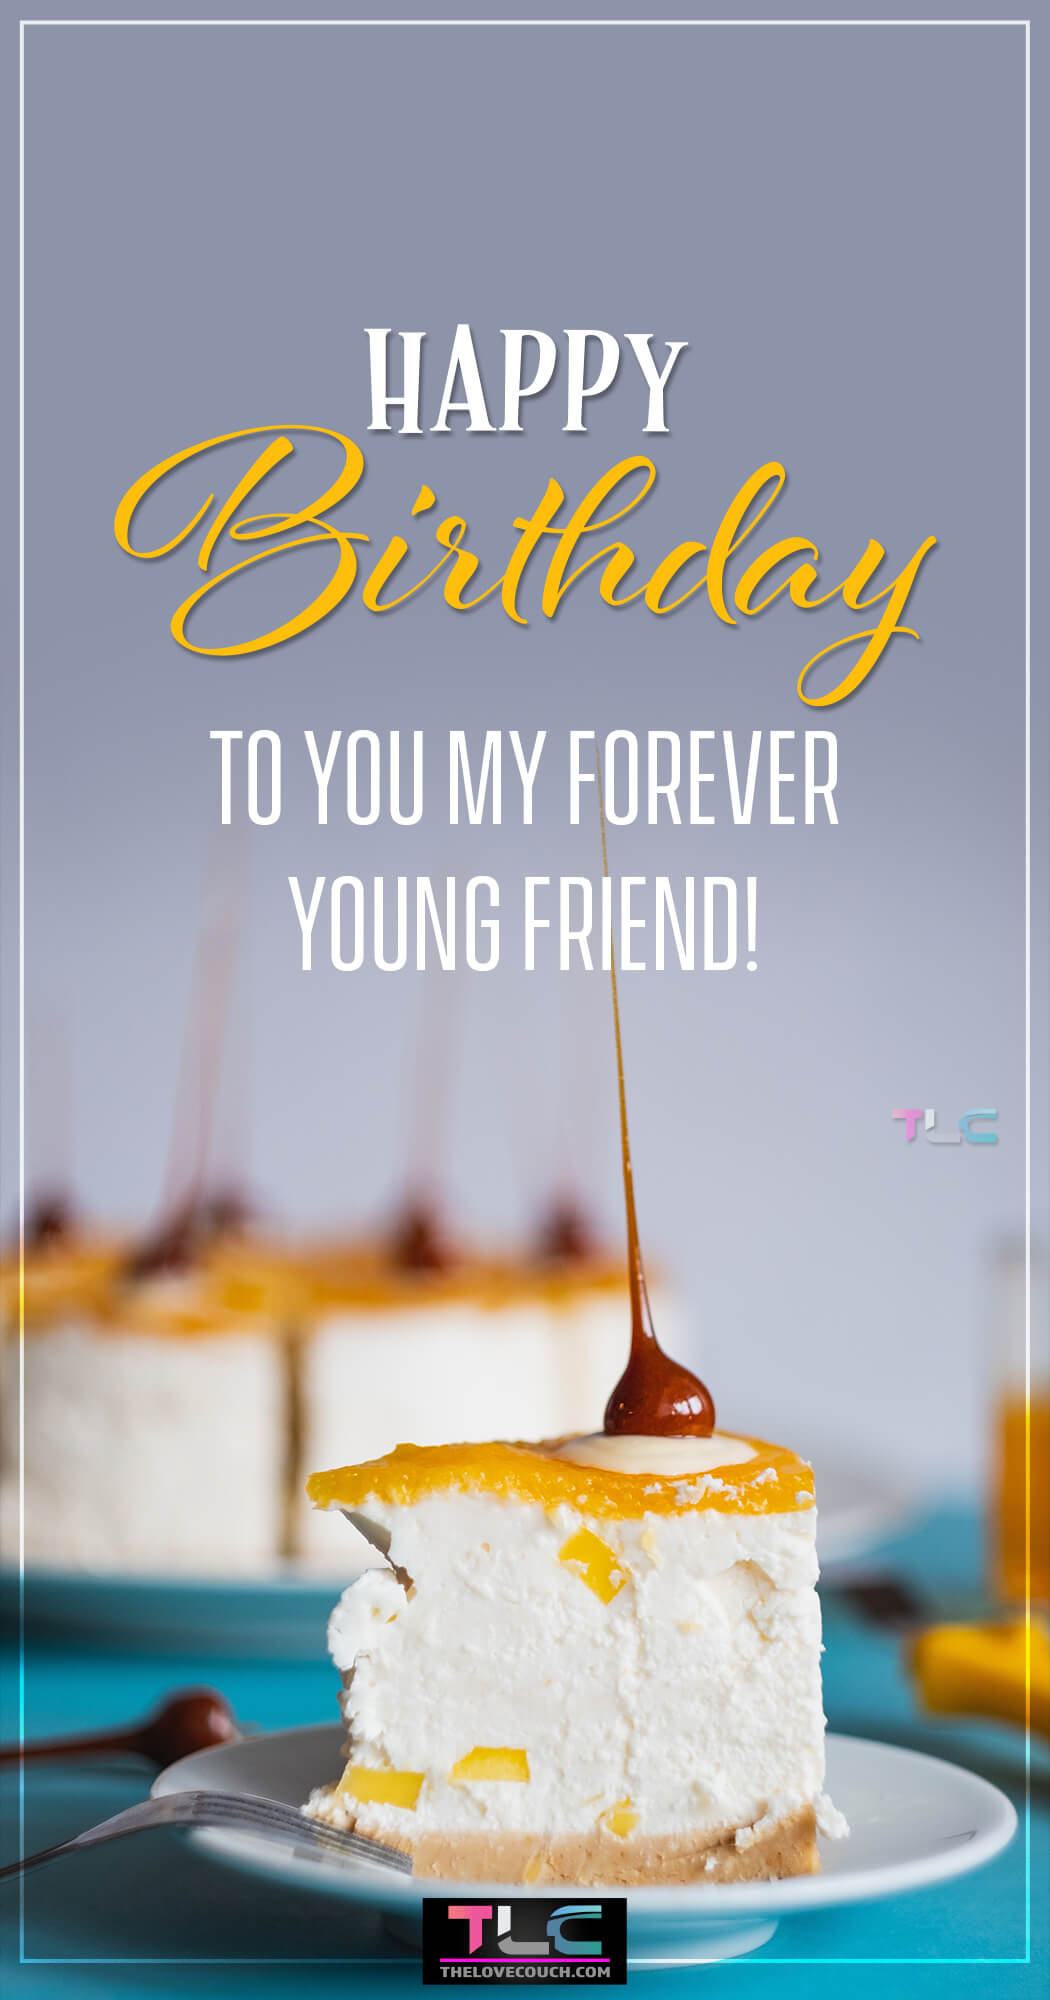 Happy Birthday to you my forever young friend!